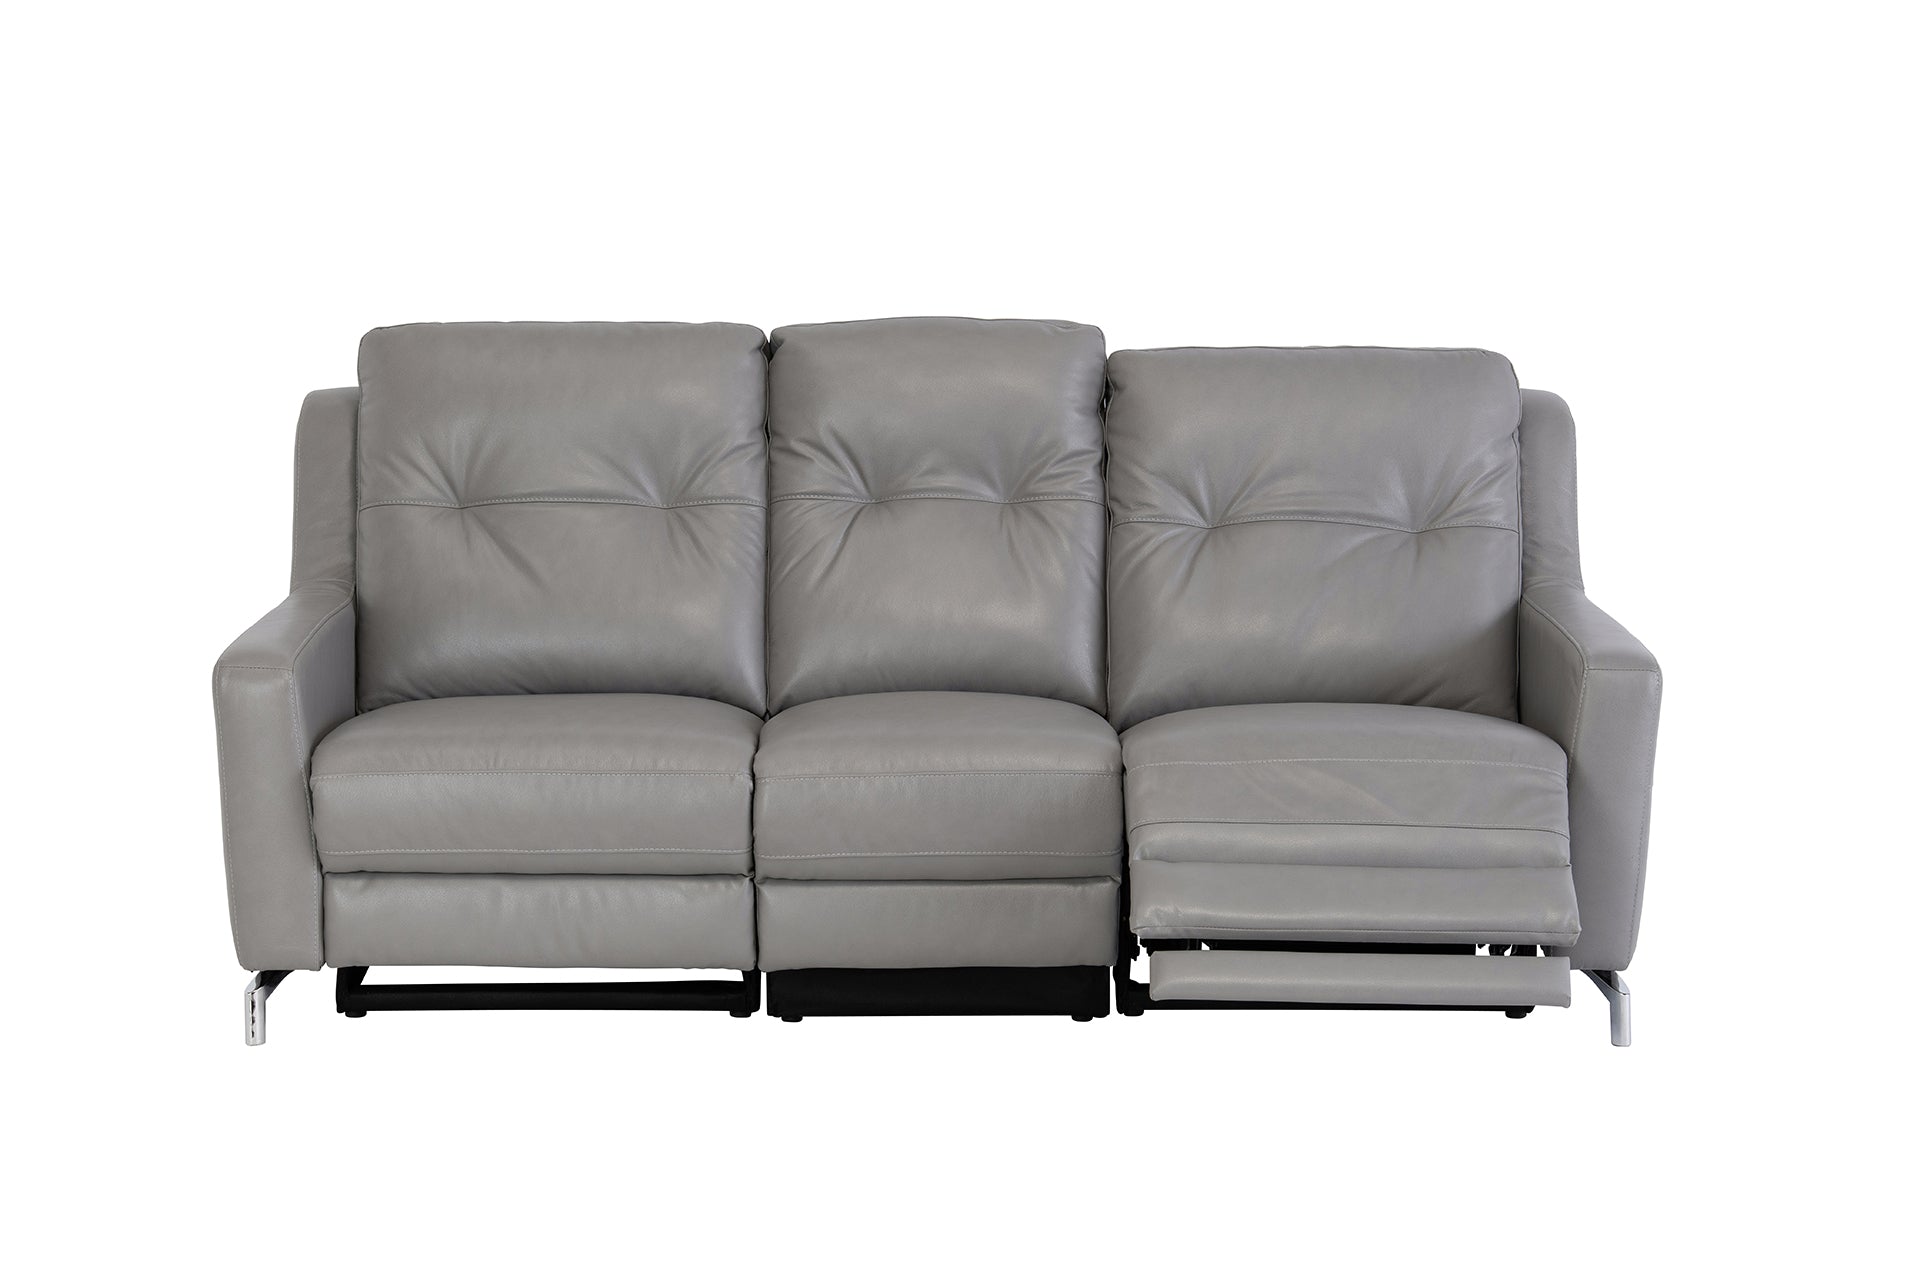 3 seater electric recliner